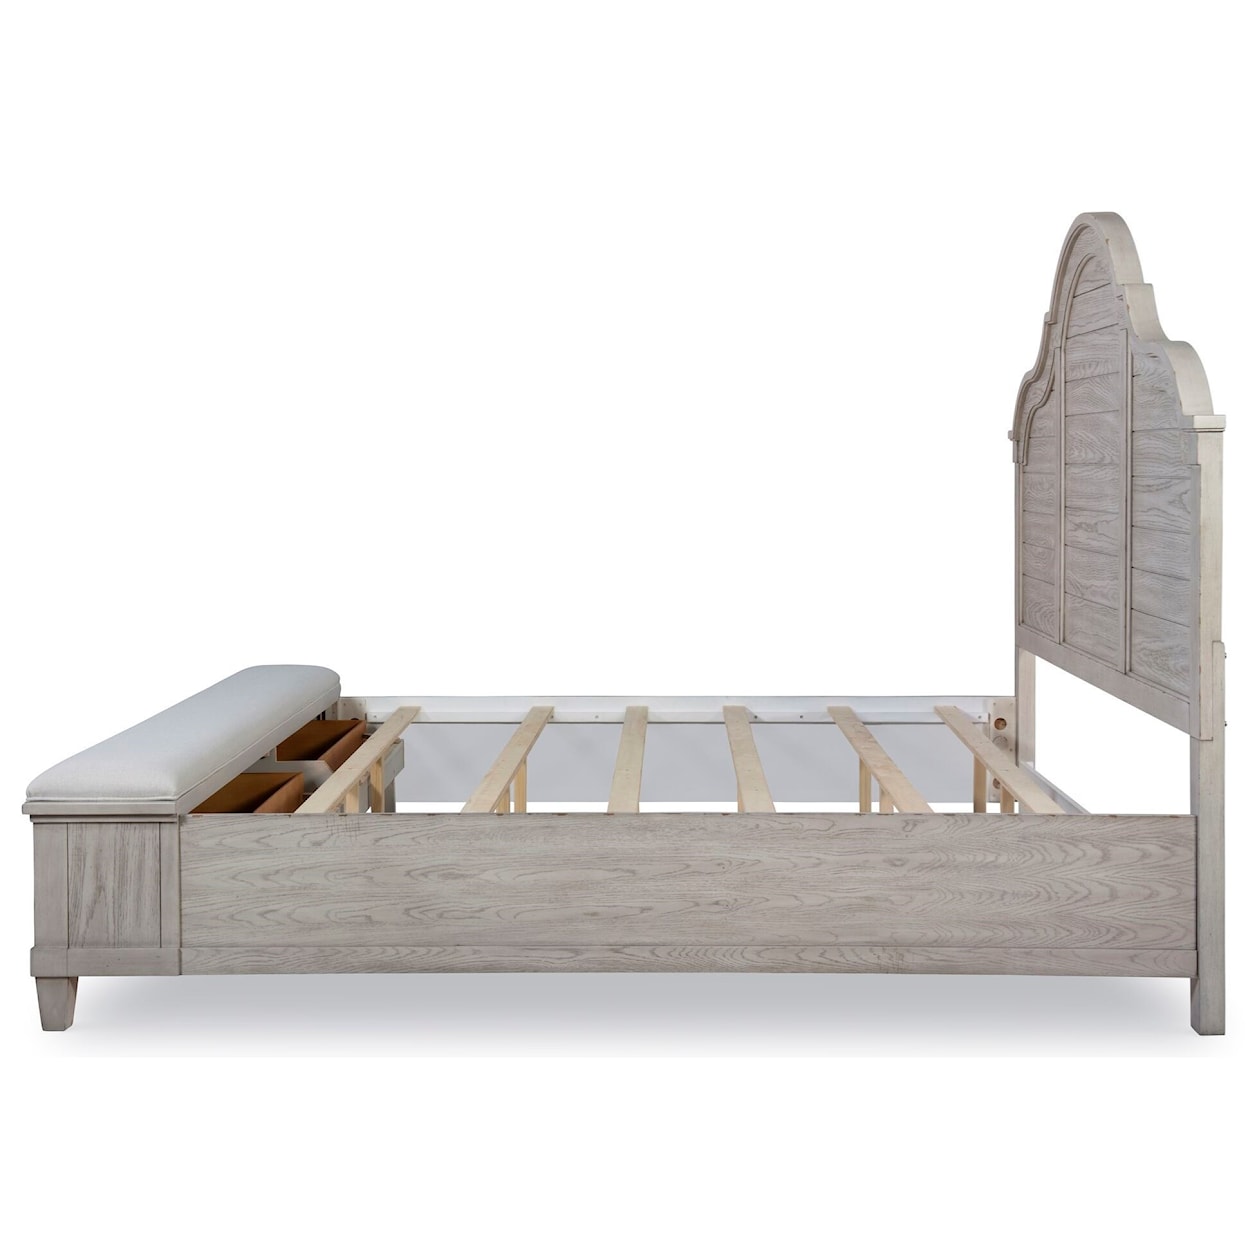 Legacy Classic Belhaven King Arched Panel Bed with Storage Ftbd